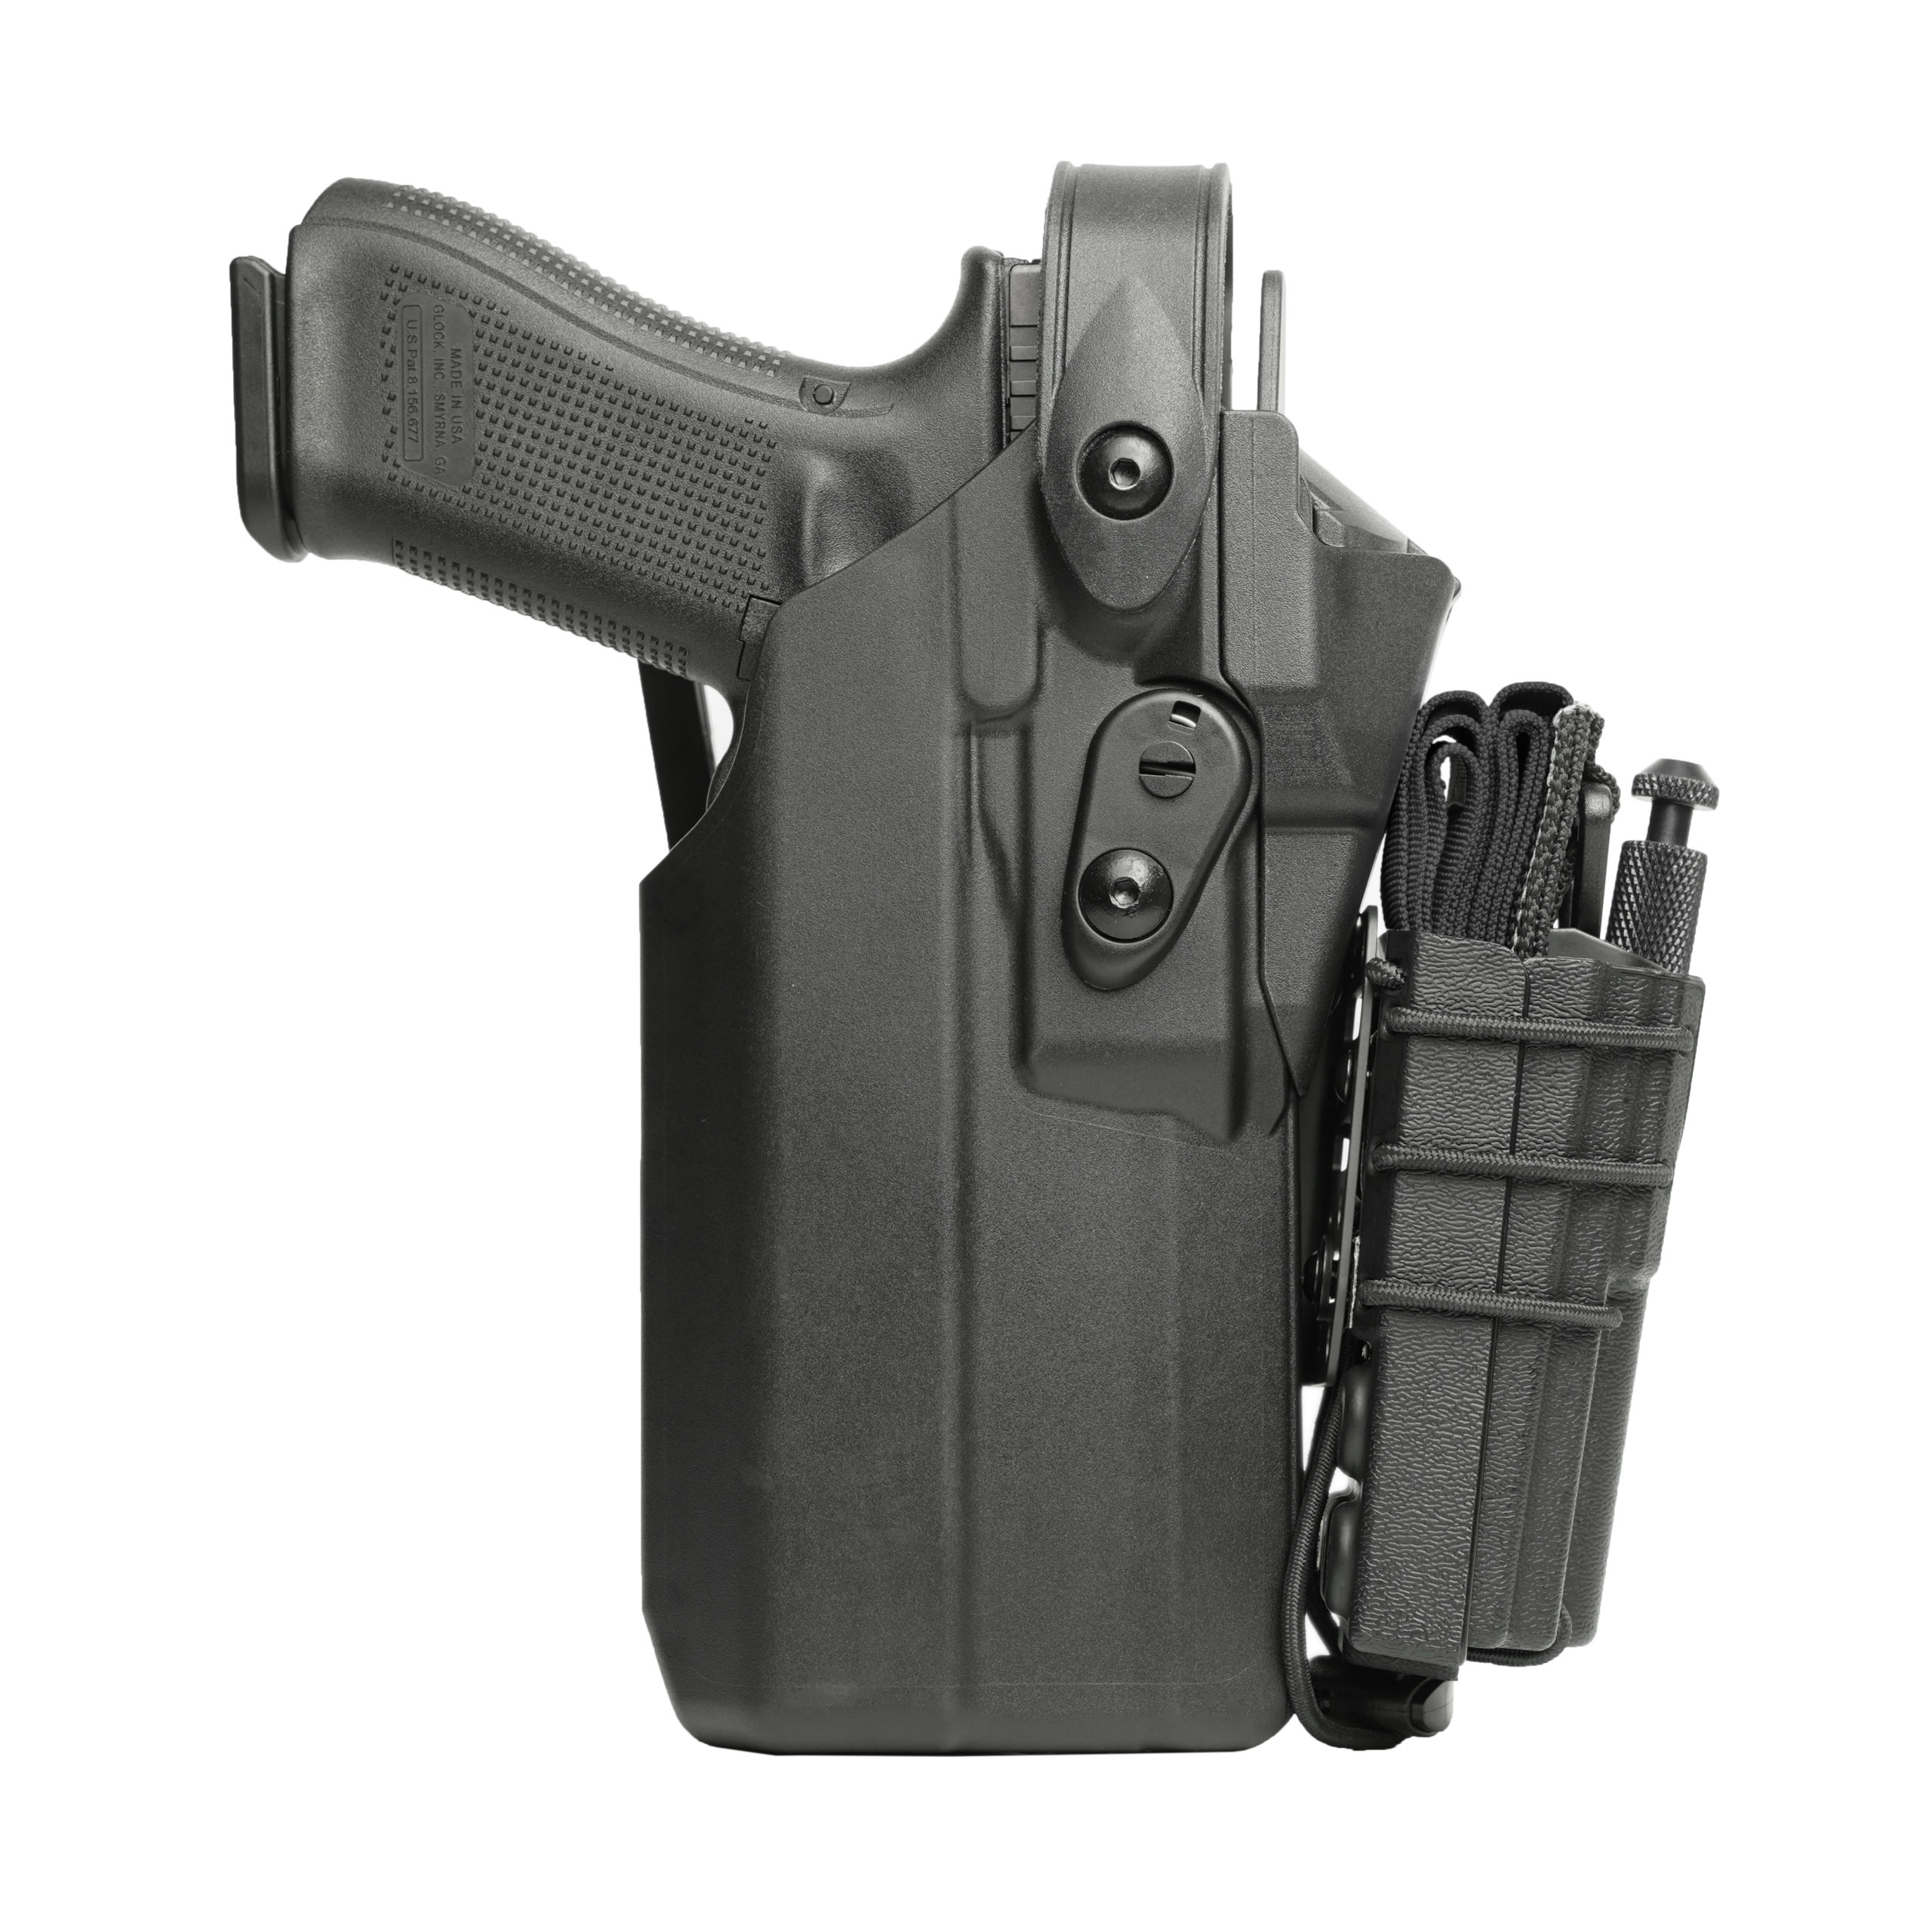 no mount Non-Red dot Glock Holsters only For Safariland QLS,Blade-Tech,G-Code 